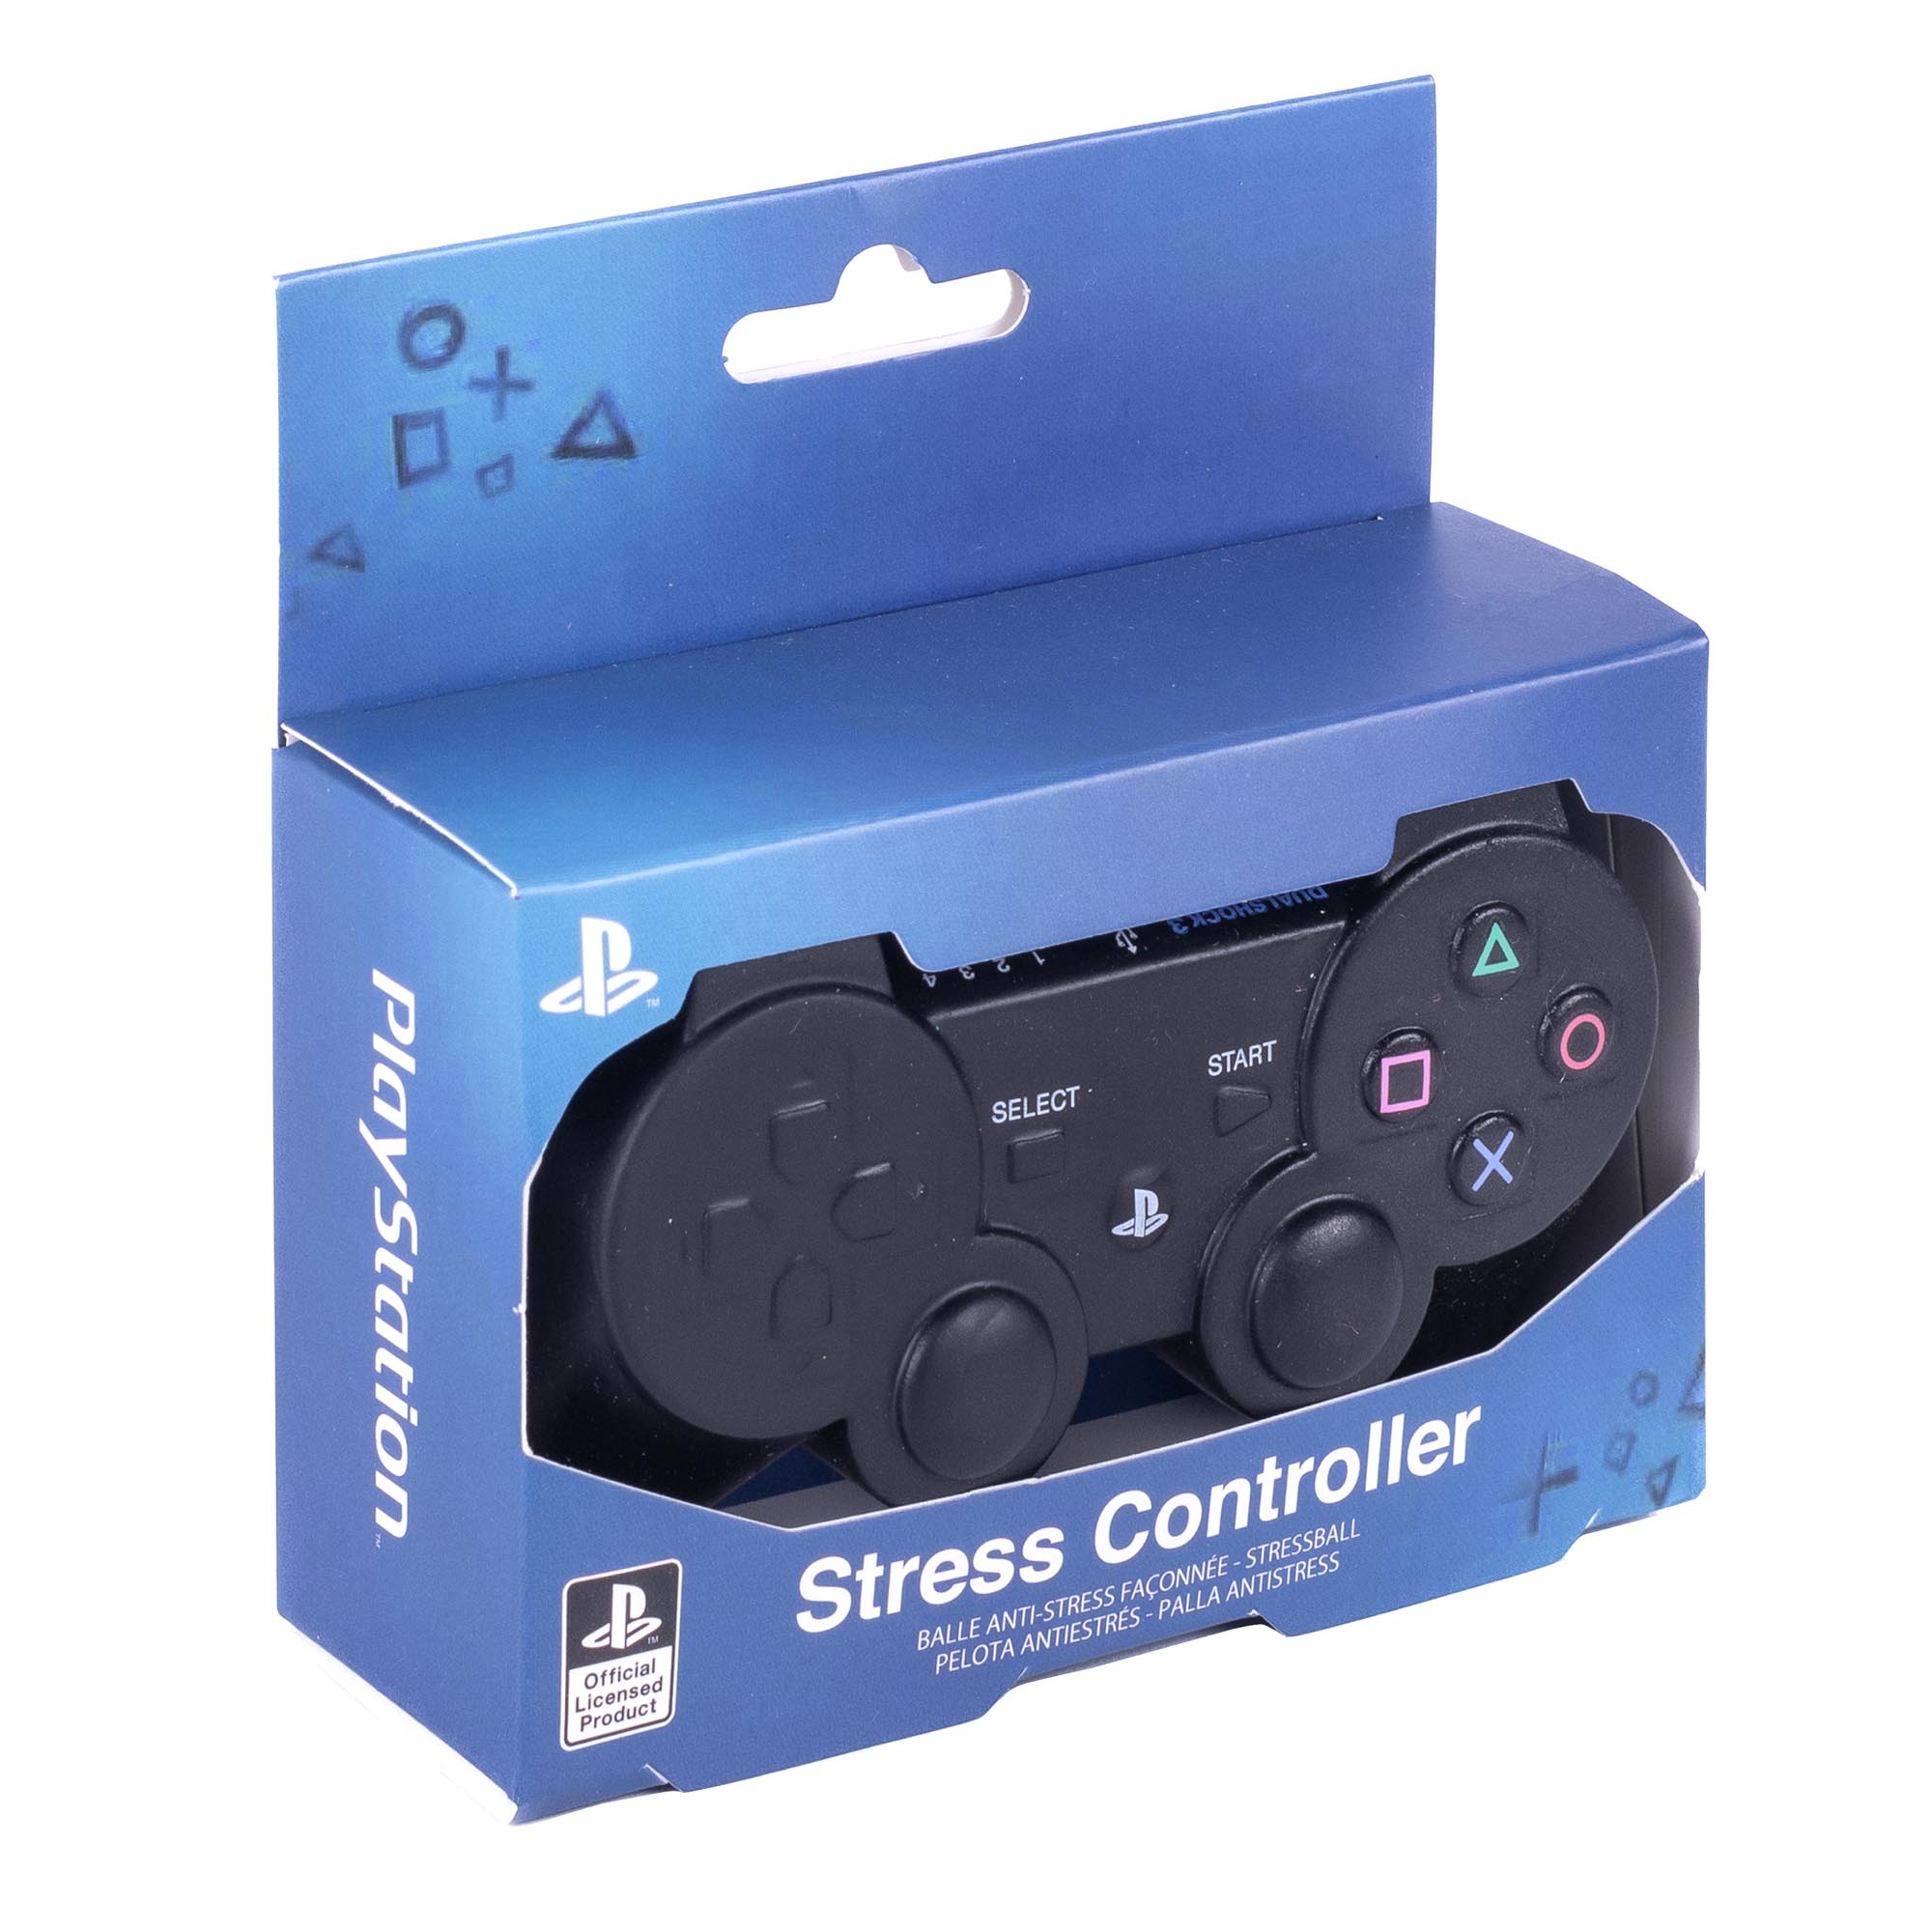 PlayStation Stress Controller 